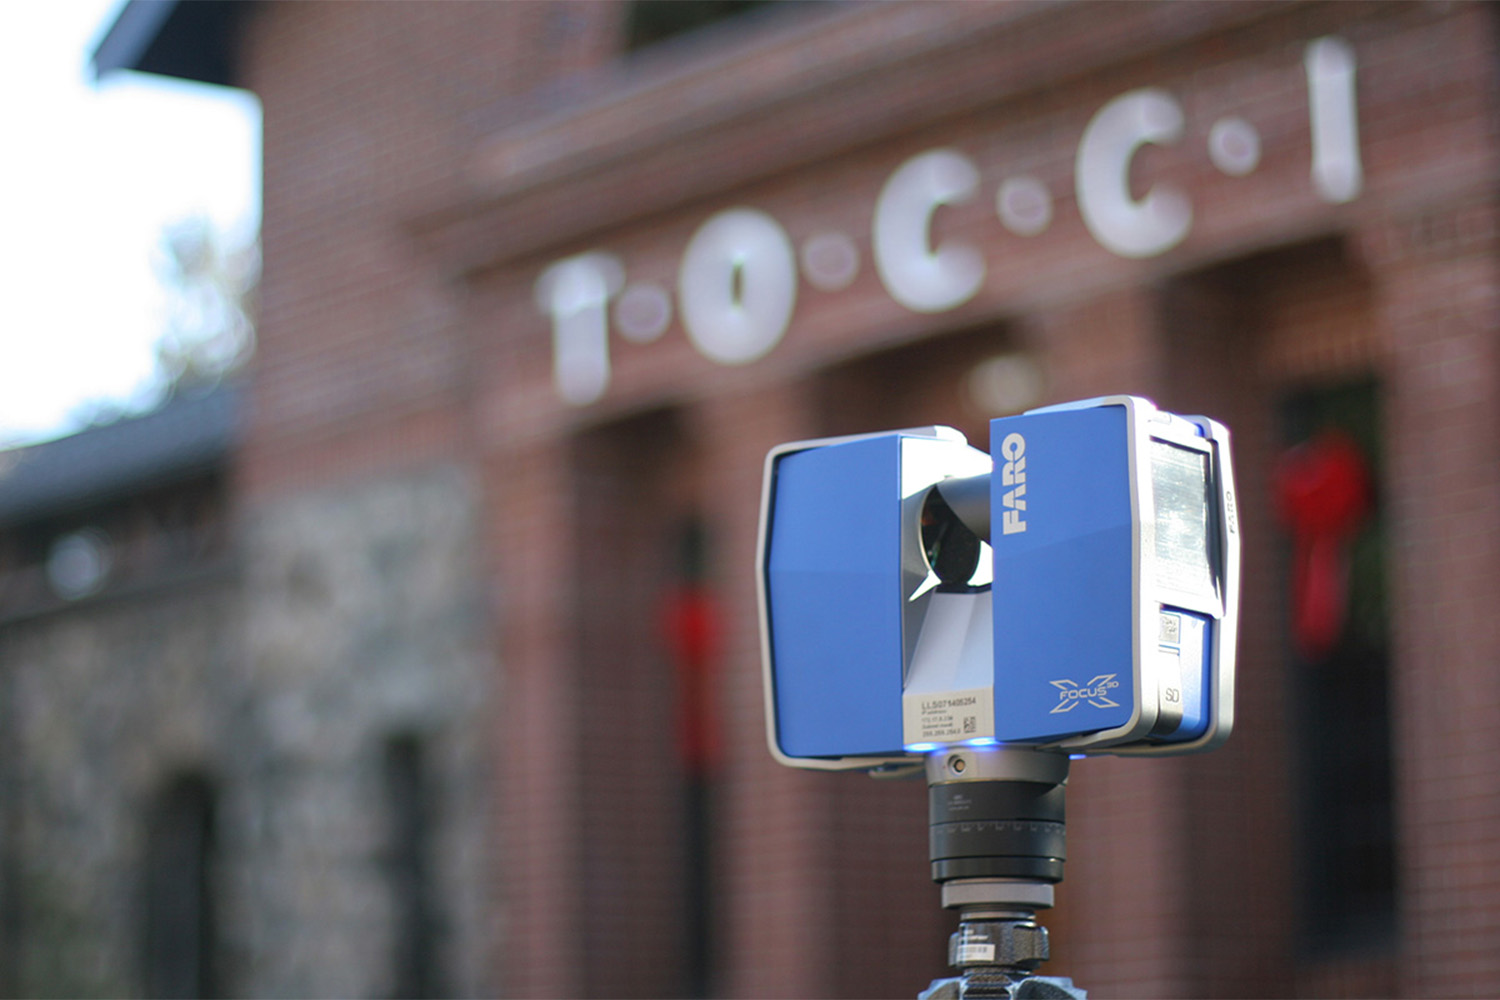 laser scanner in front of the Tocci office building 